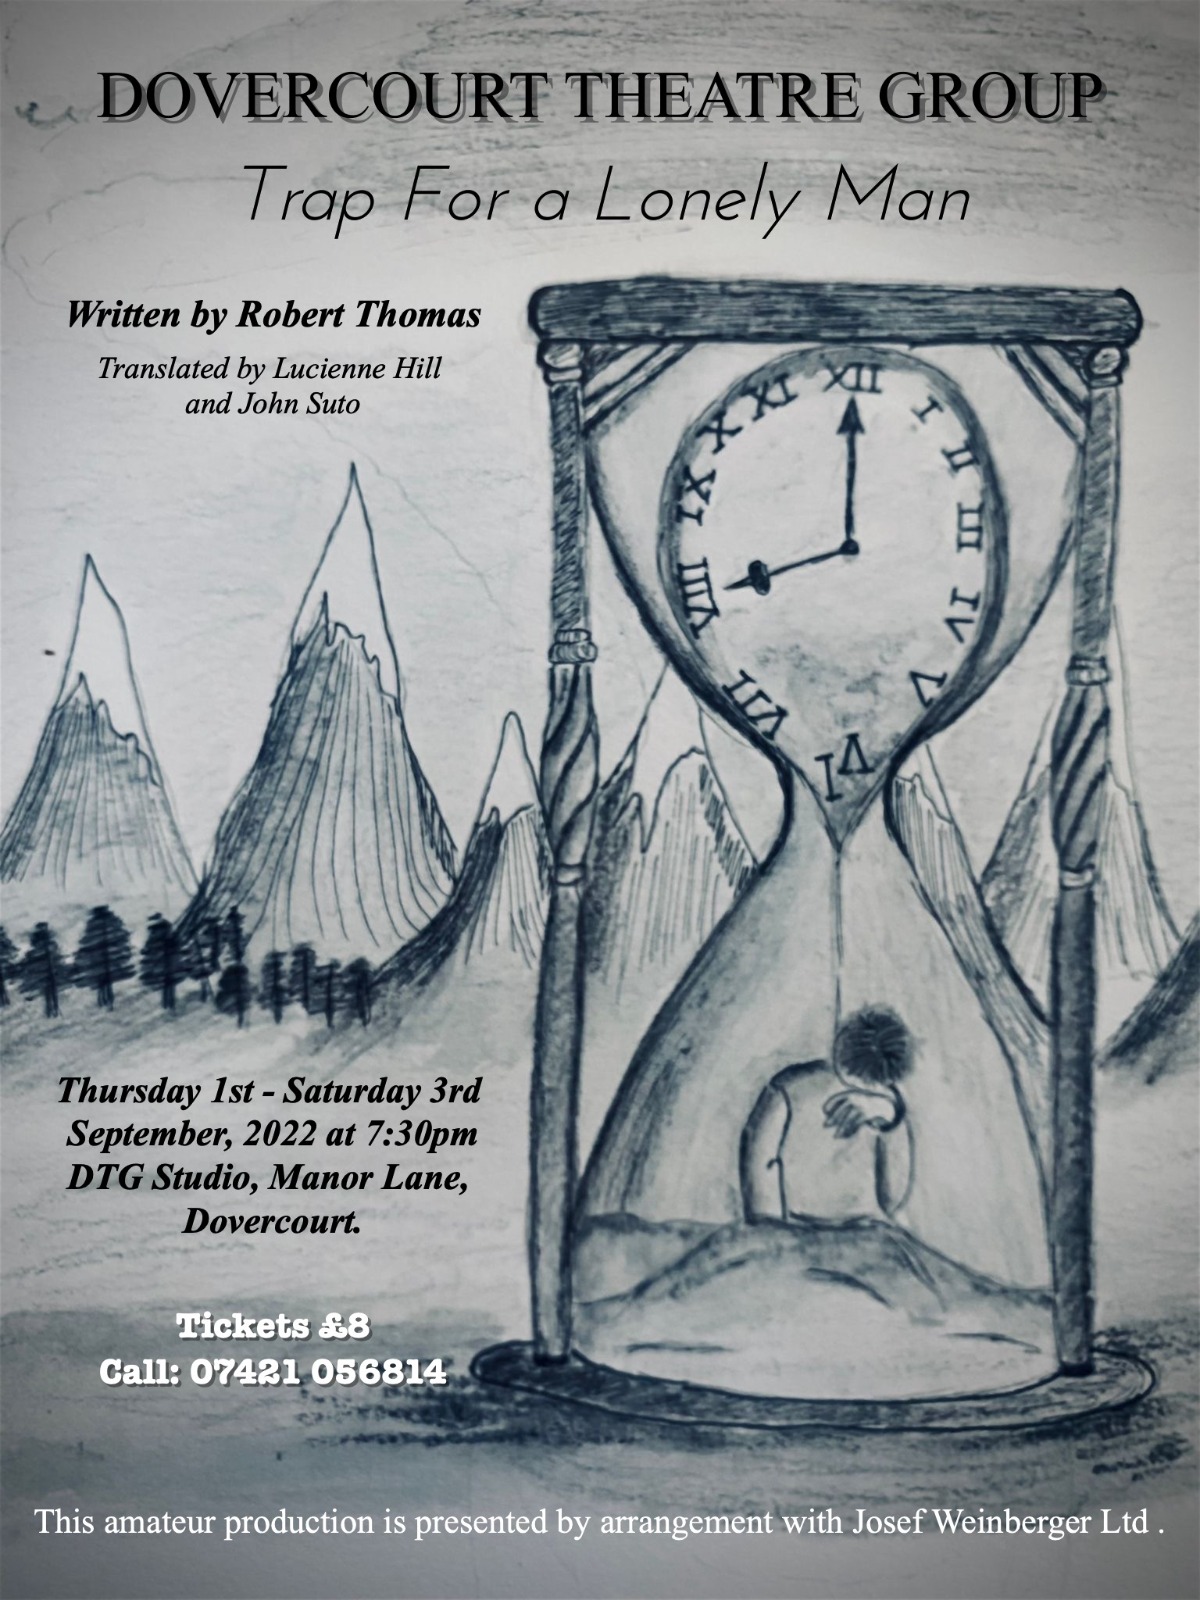 Poster image. Pencil drawing: a background of snow-capped mountains; in the foreground, a huge hourglass with a clock in the upper part dissolving into sand which is smothering a male figure trapped below.